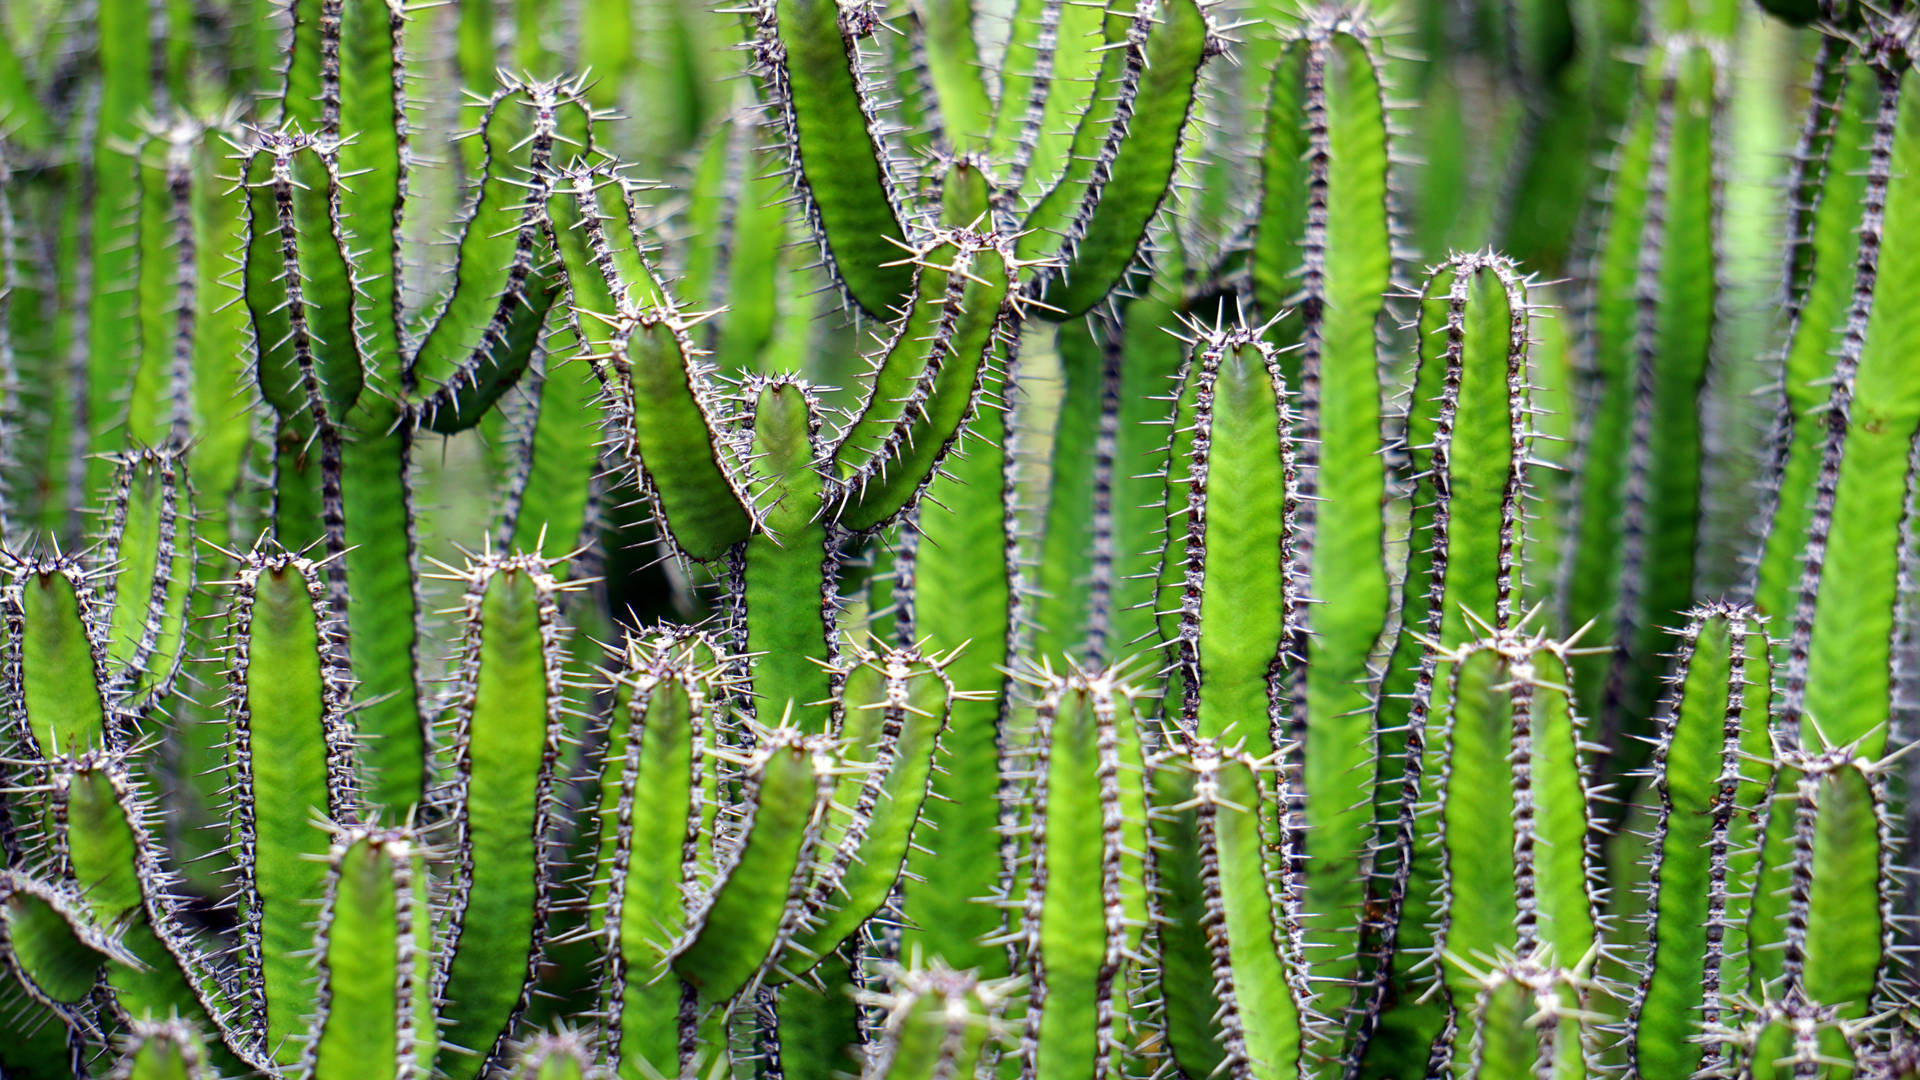 Tall Cactus Plants With White Thorns Background